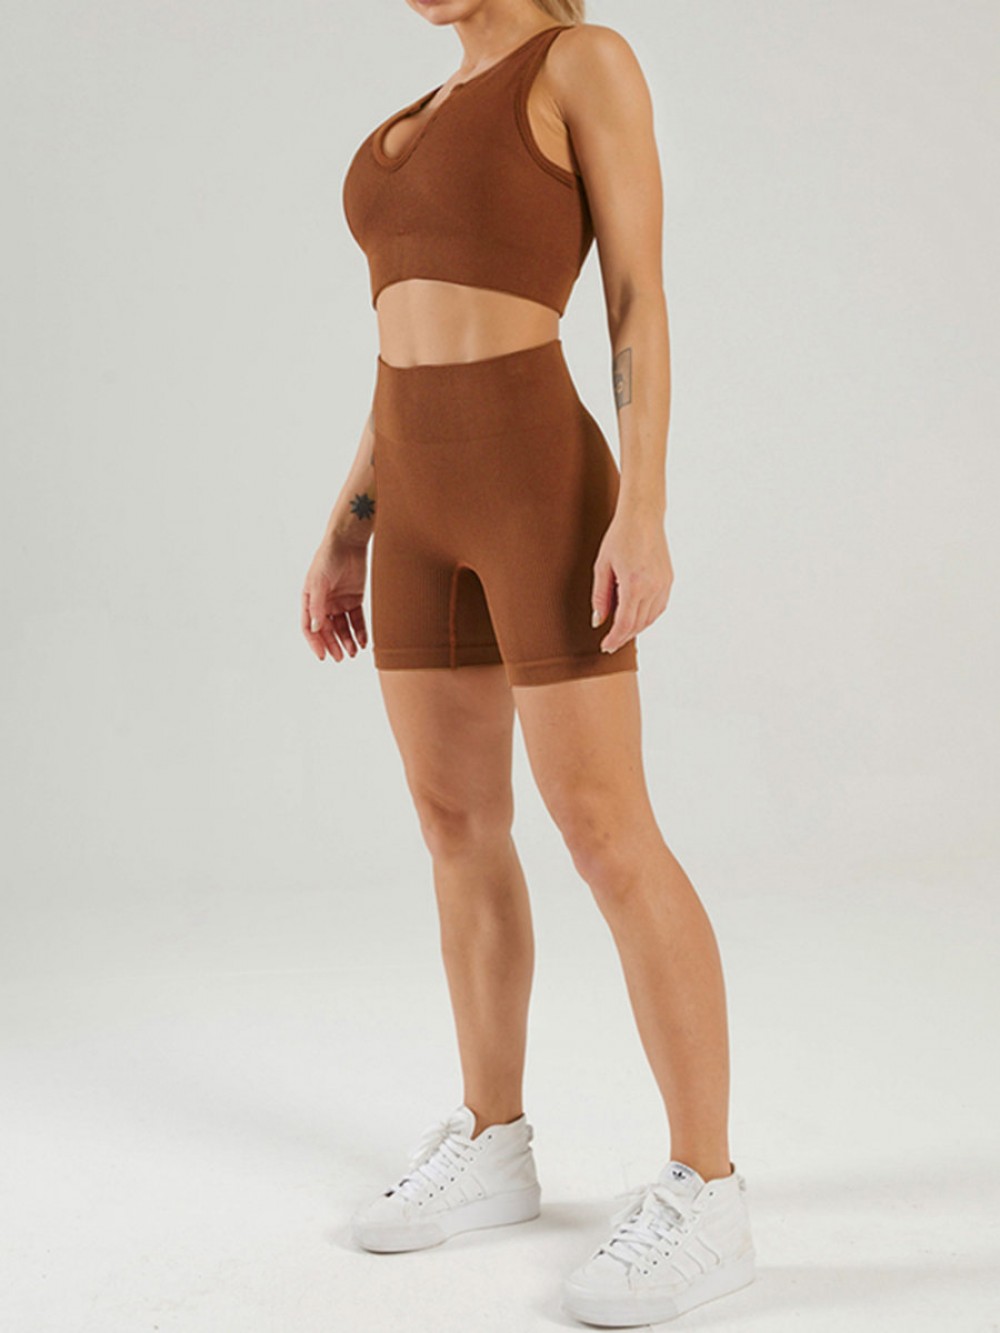 Dark Brown Low Neck Sports Bra And Seamless Shorts Set Stretchy